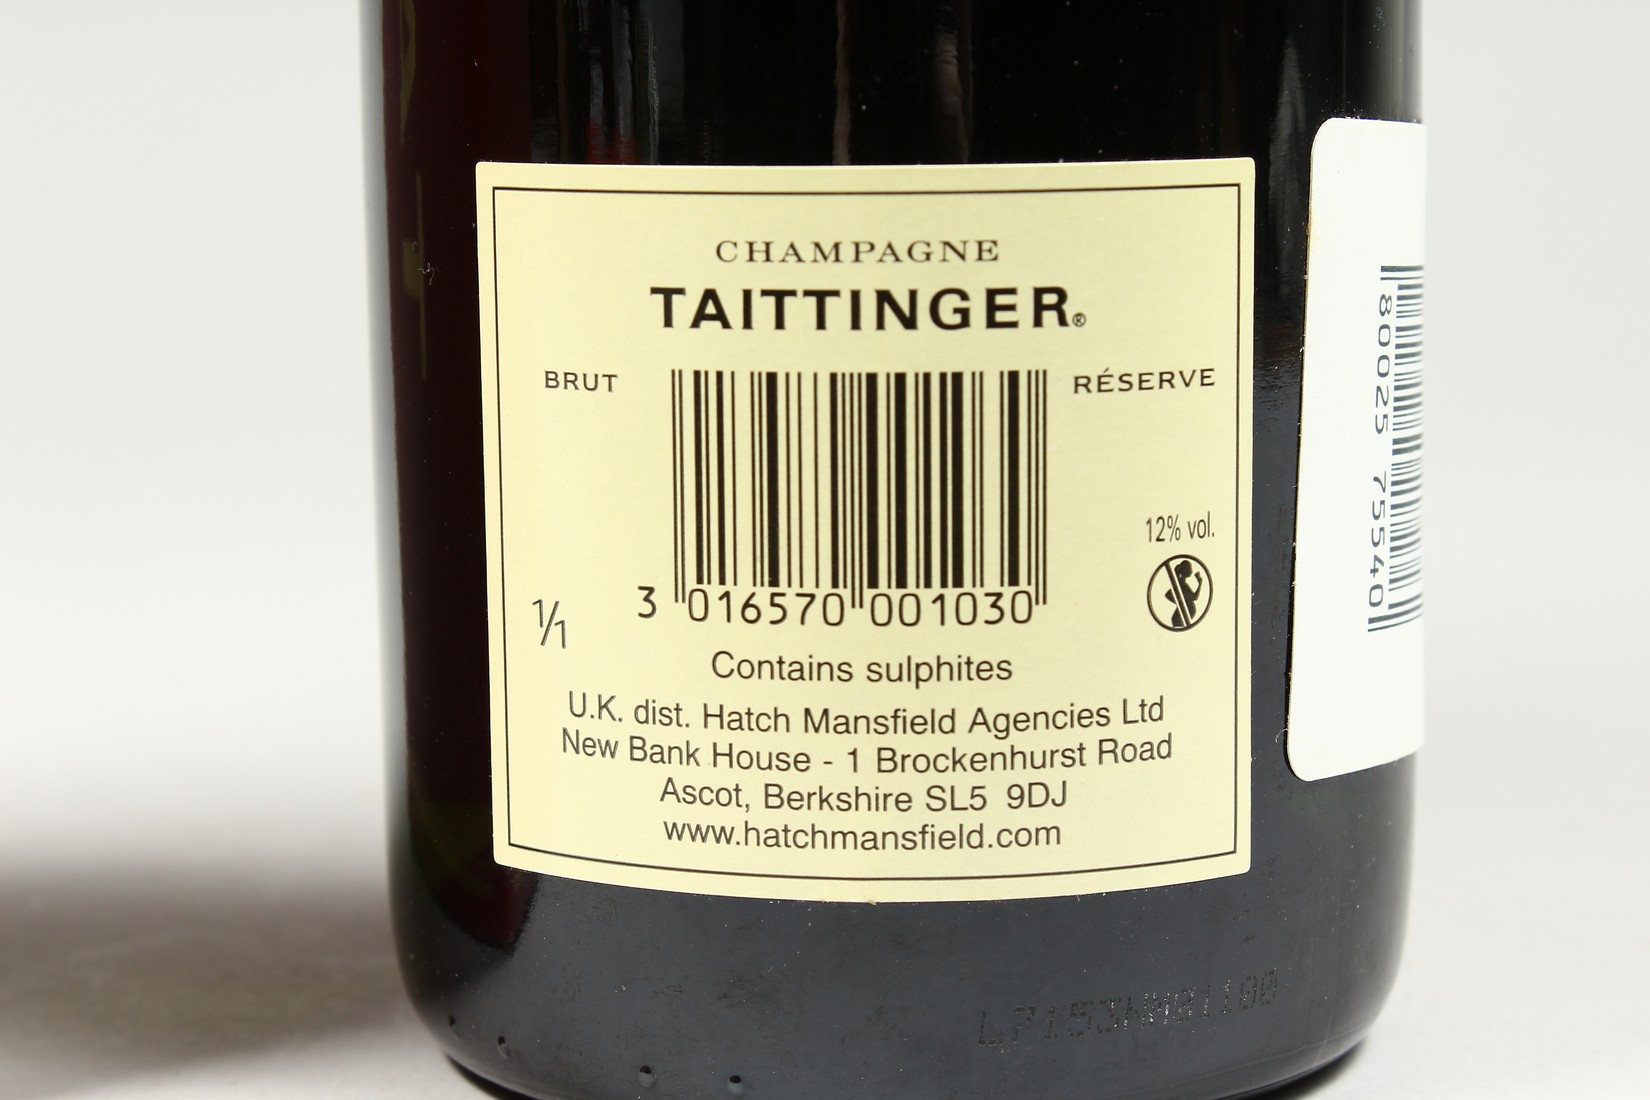 A BOTTLE OF TATTINGER CHAMPAGNE in an unopened box. - Image 5 of 8